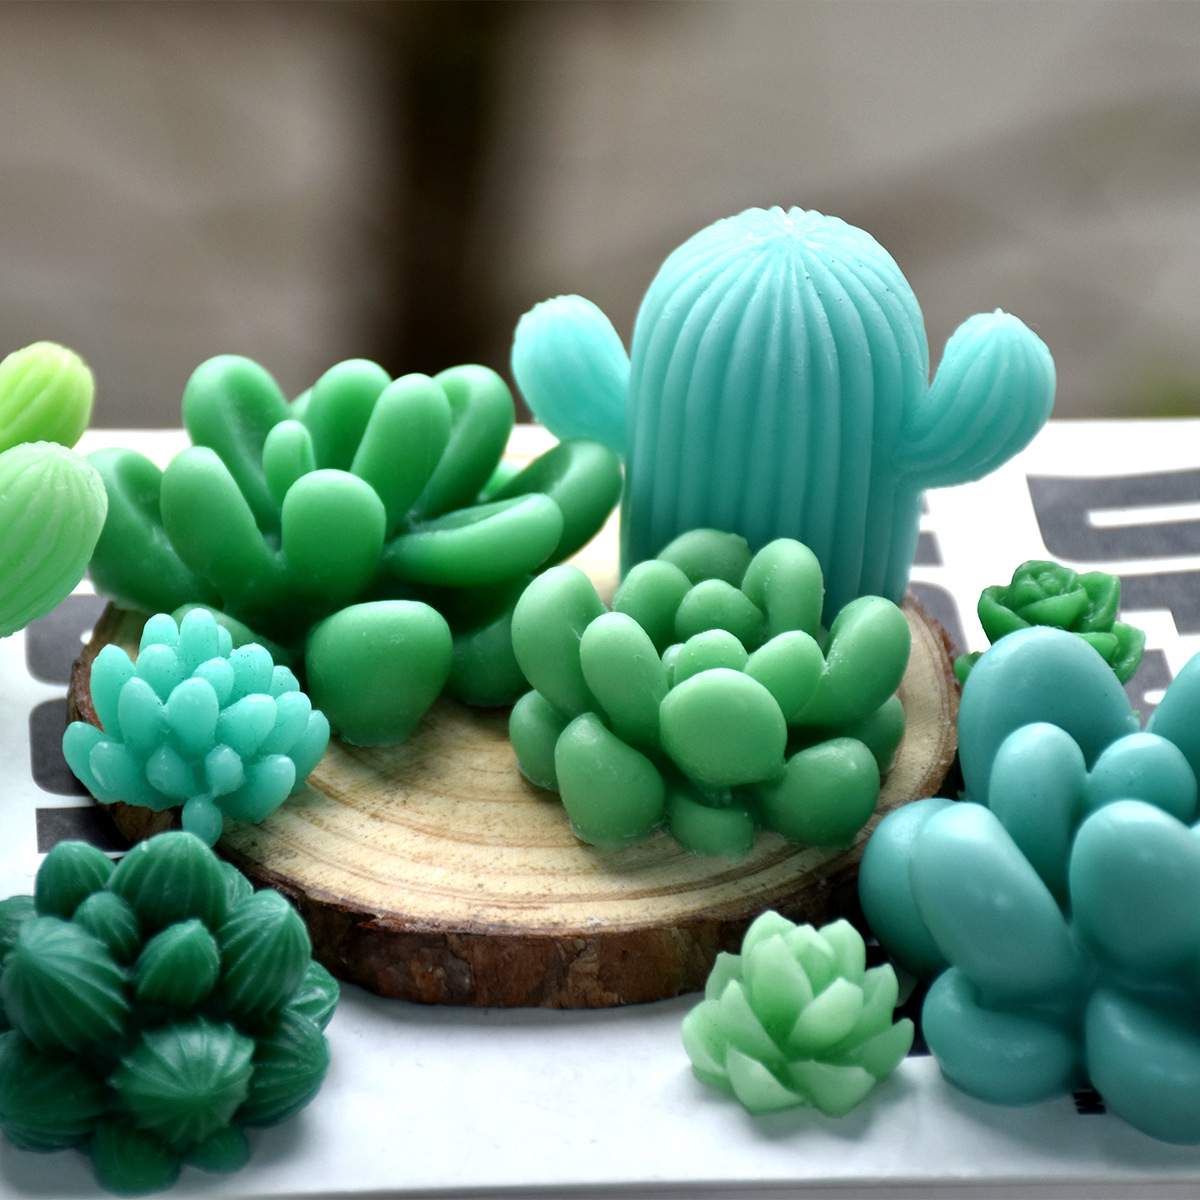 Cute Three-Dimensional Fleshy Cactus Silicone Model Potted Plant Aromatherapy Candle Gypsum Ornament Candle Model